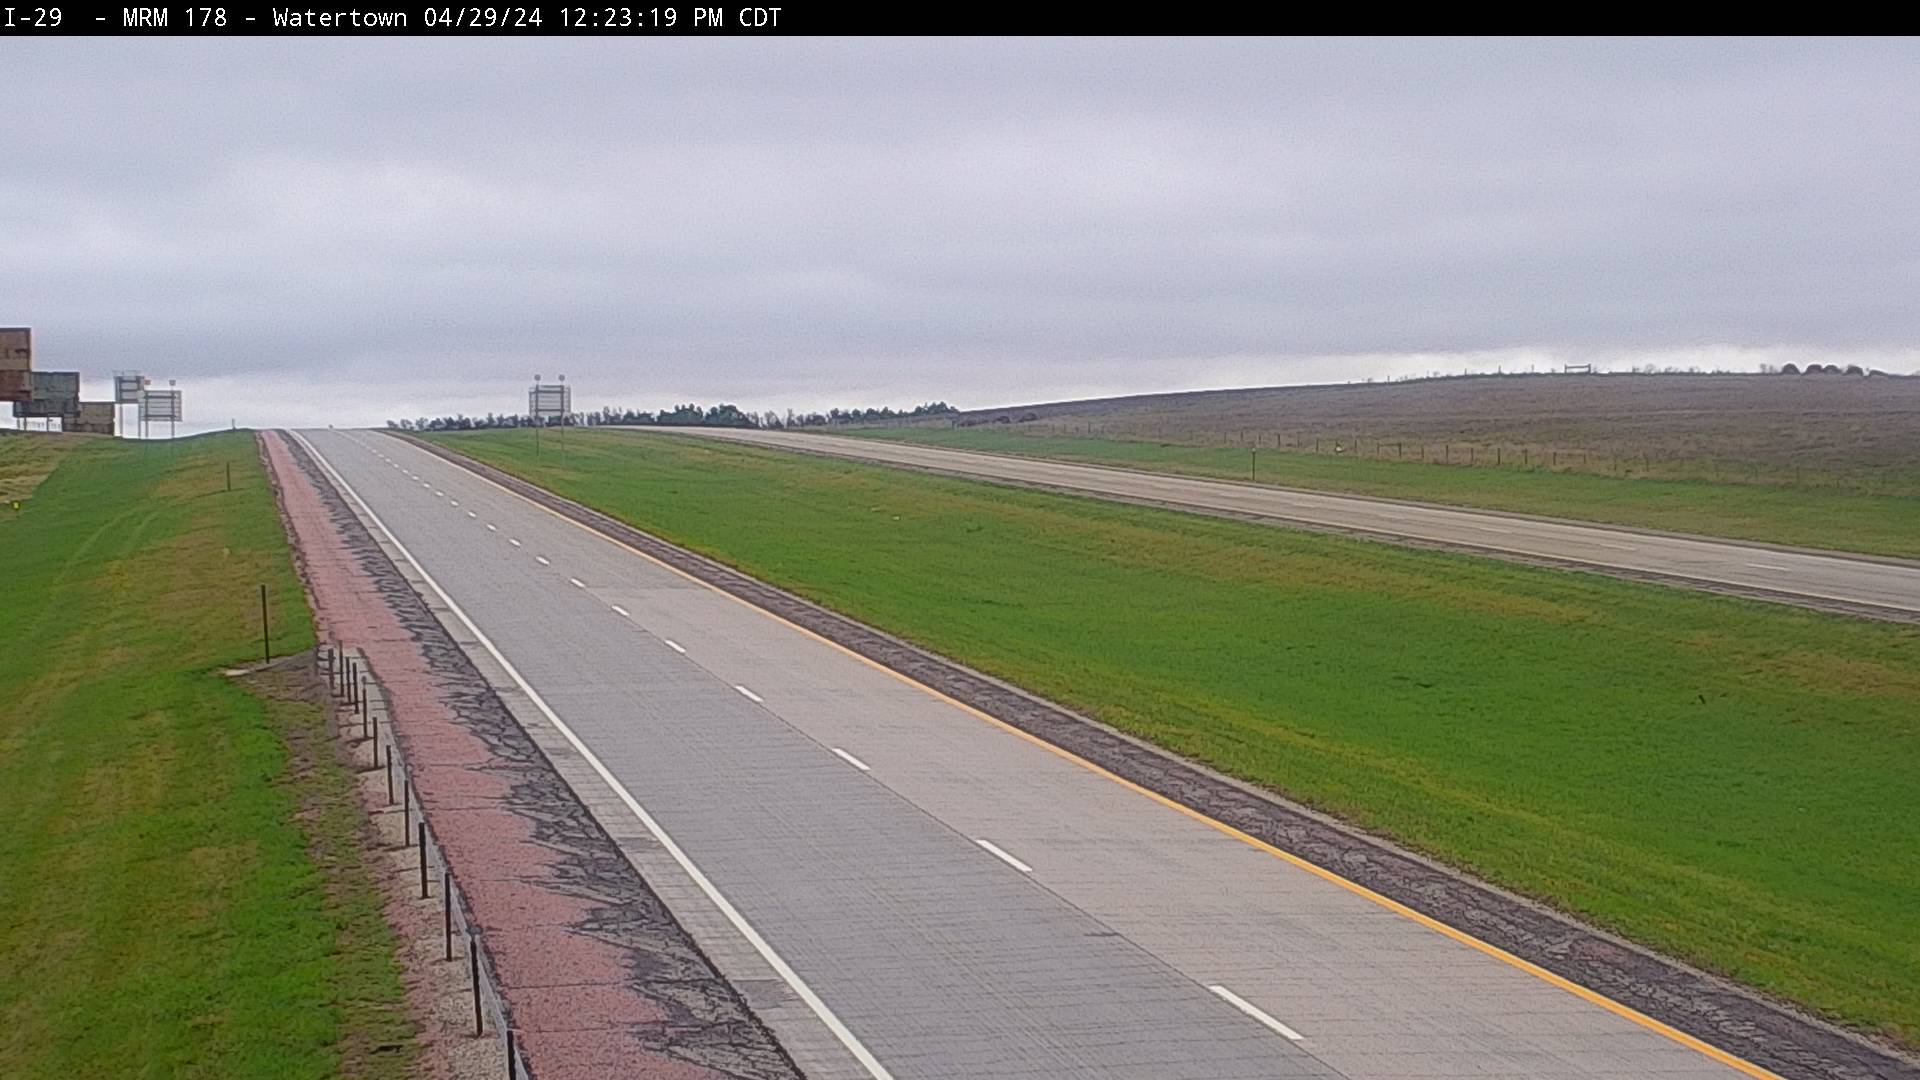 Traffic Cam North of town along I-29 @ MP 179 - North Player